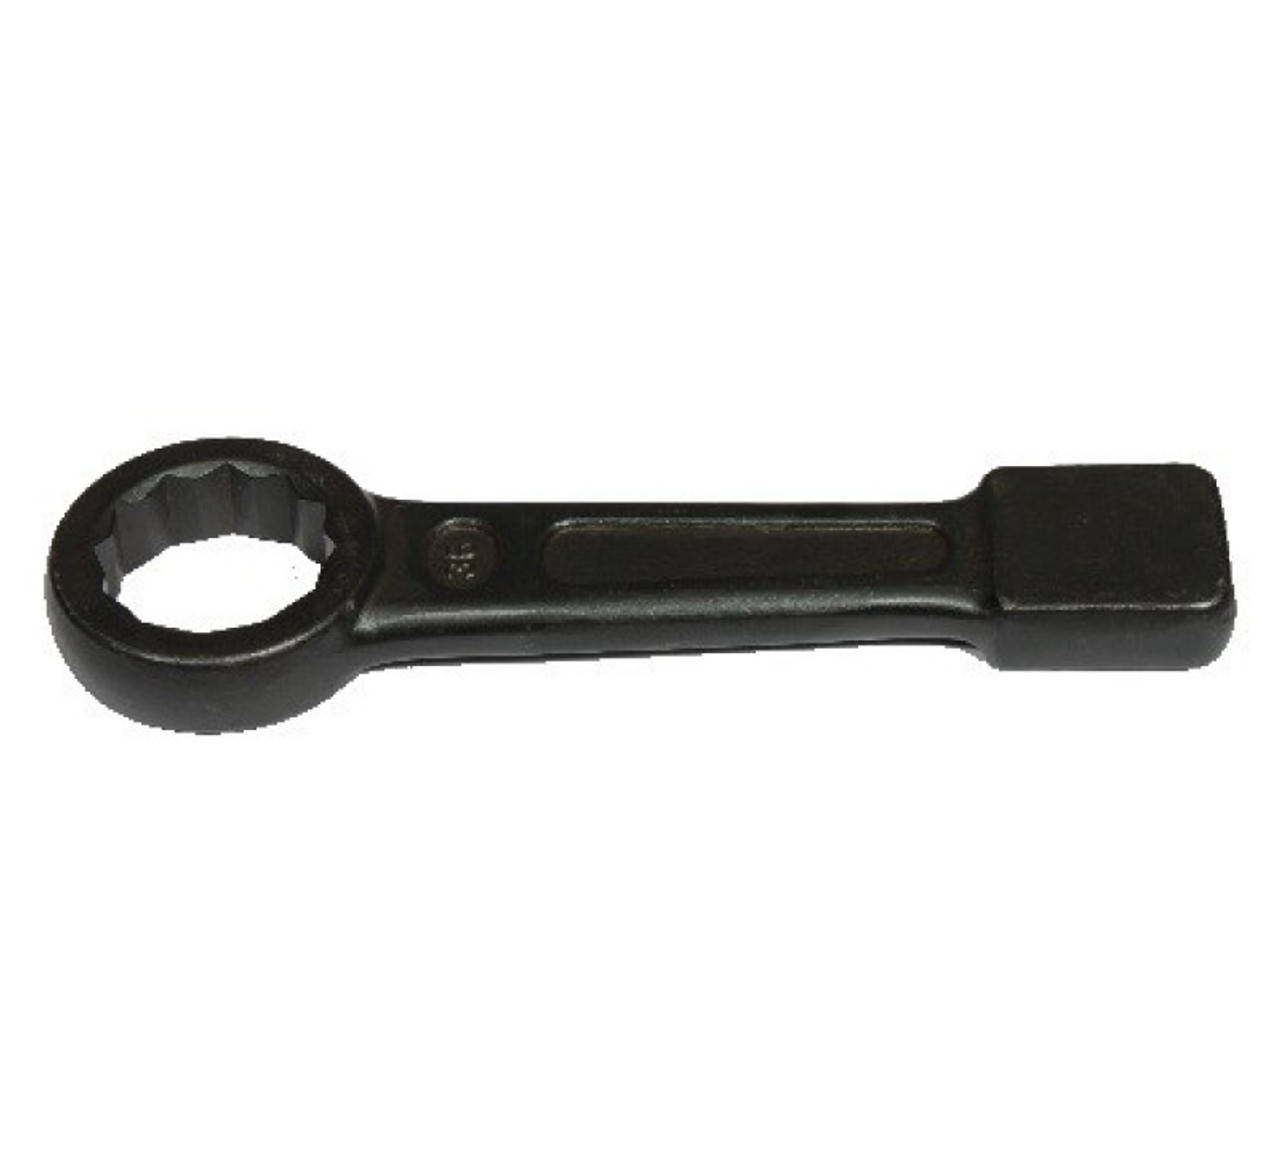 IMPA 611163 Striking wrench single open end 100 mm Kukko 133-100 (deliverytime 2 days - ex works factory)